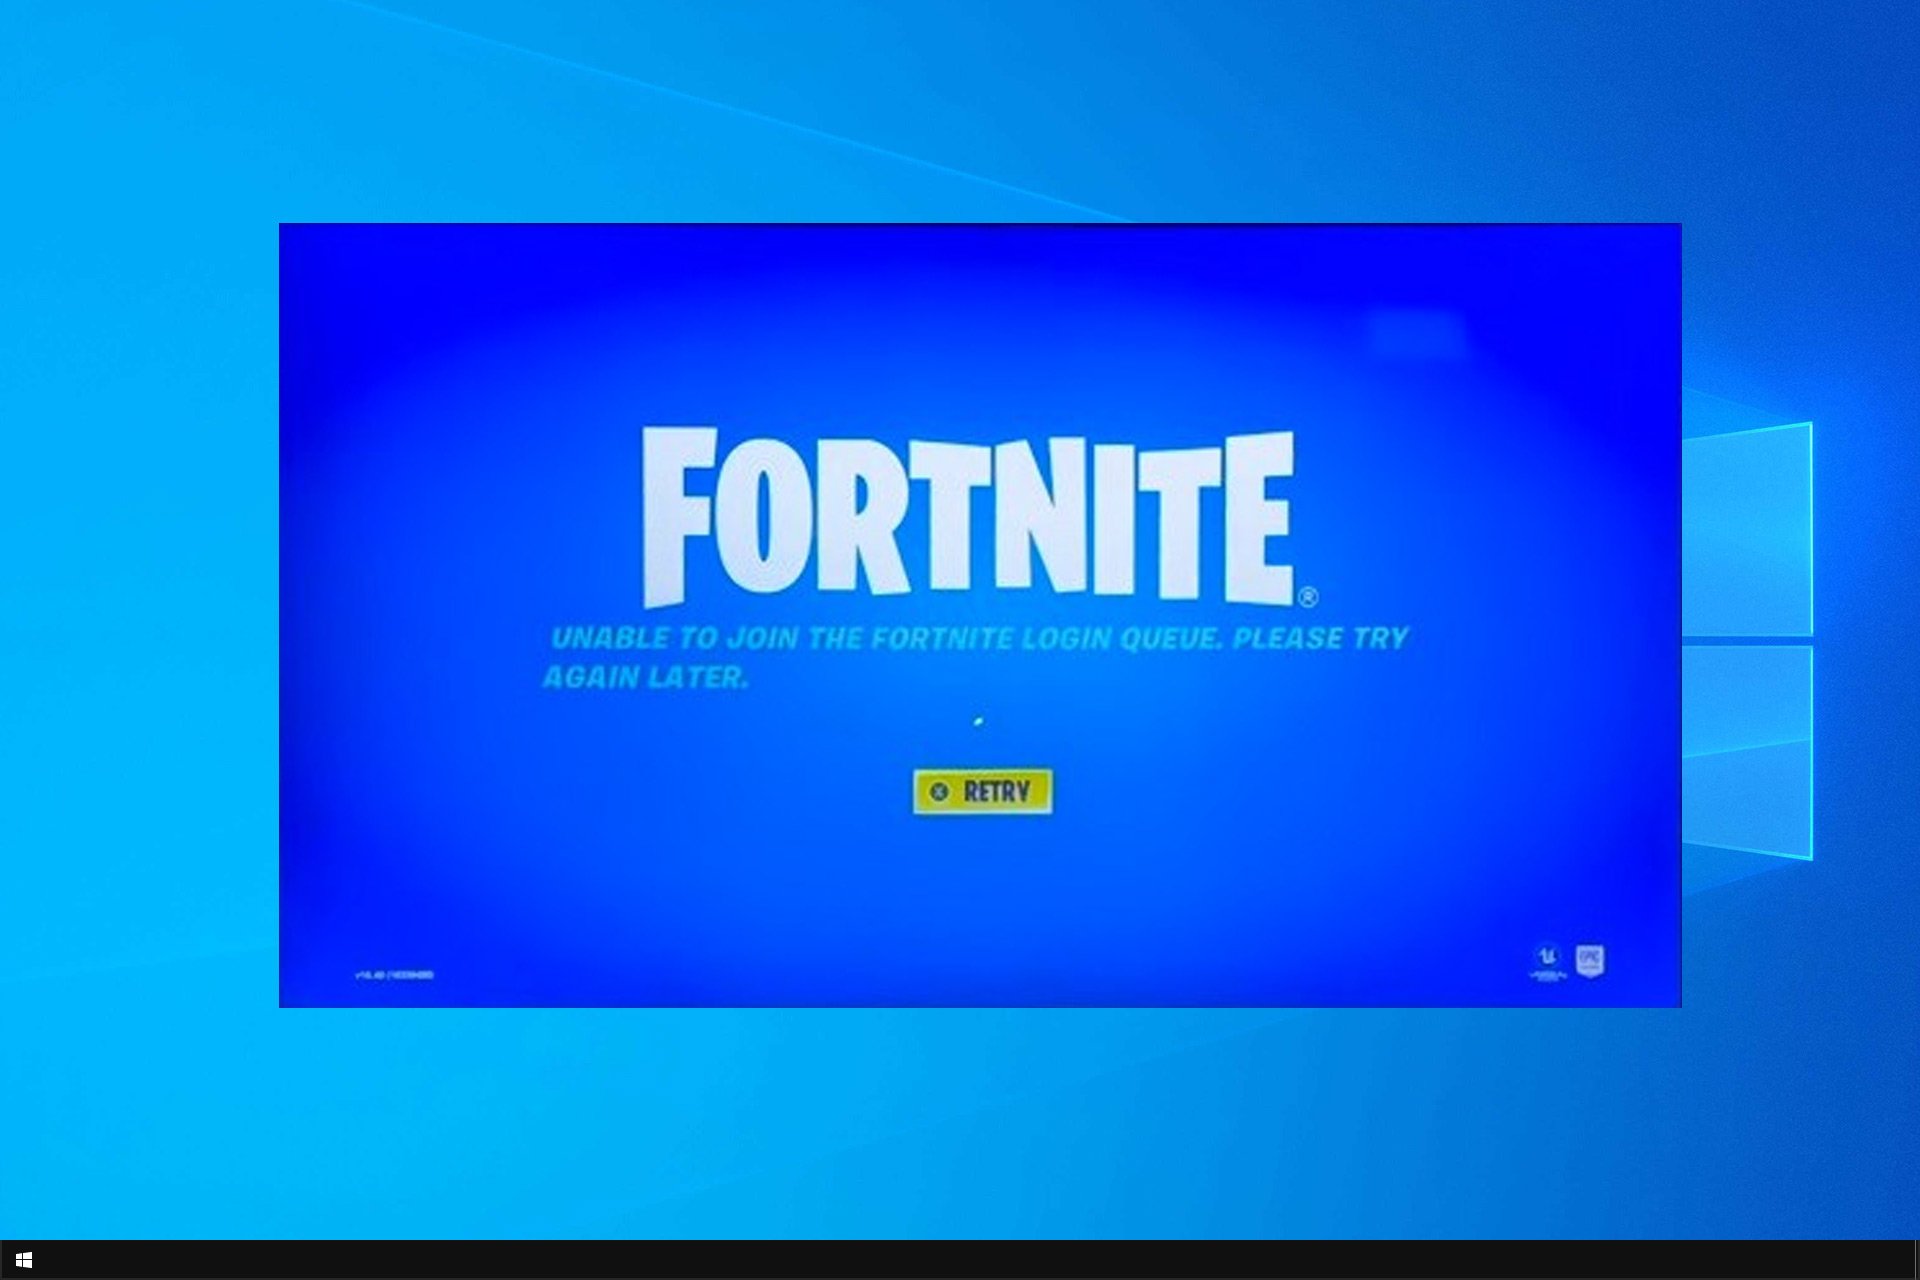 How to Fix This Client Is Not Compatible Error in 'Fortnite